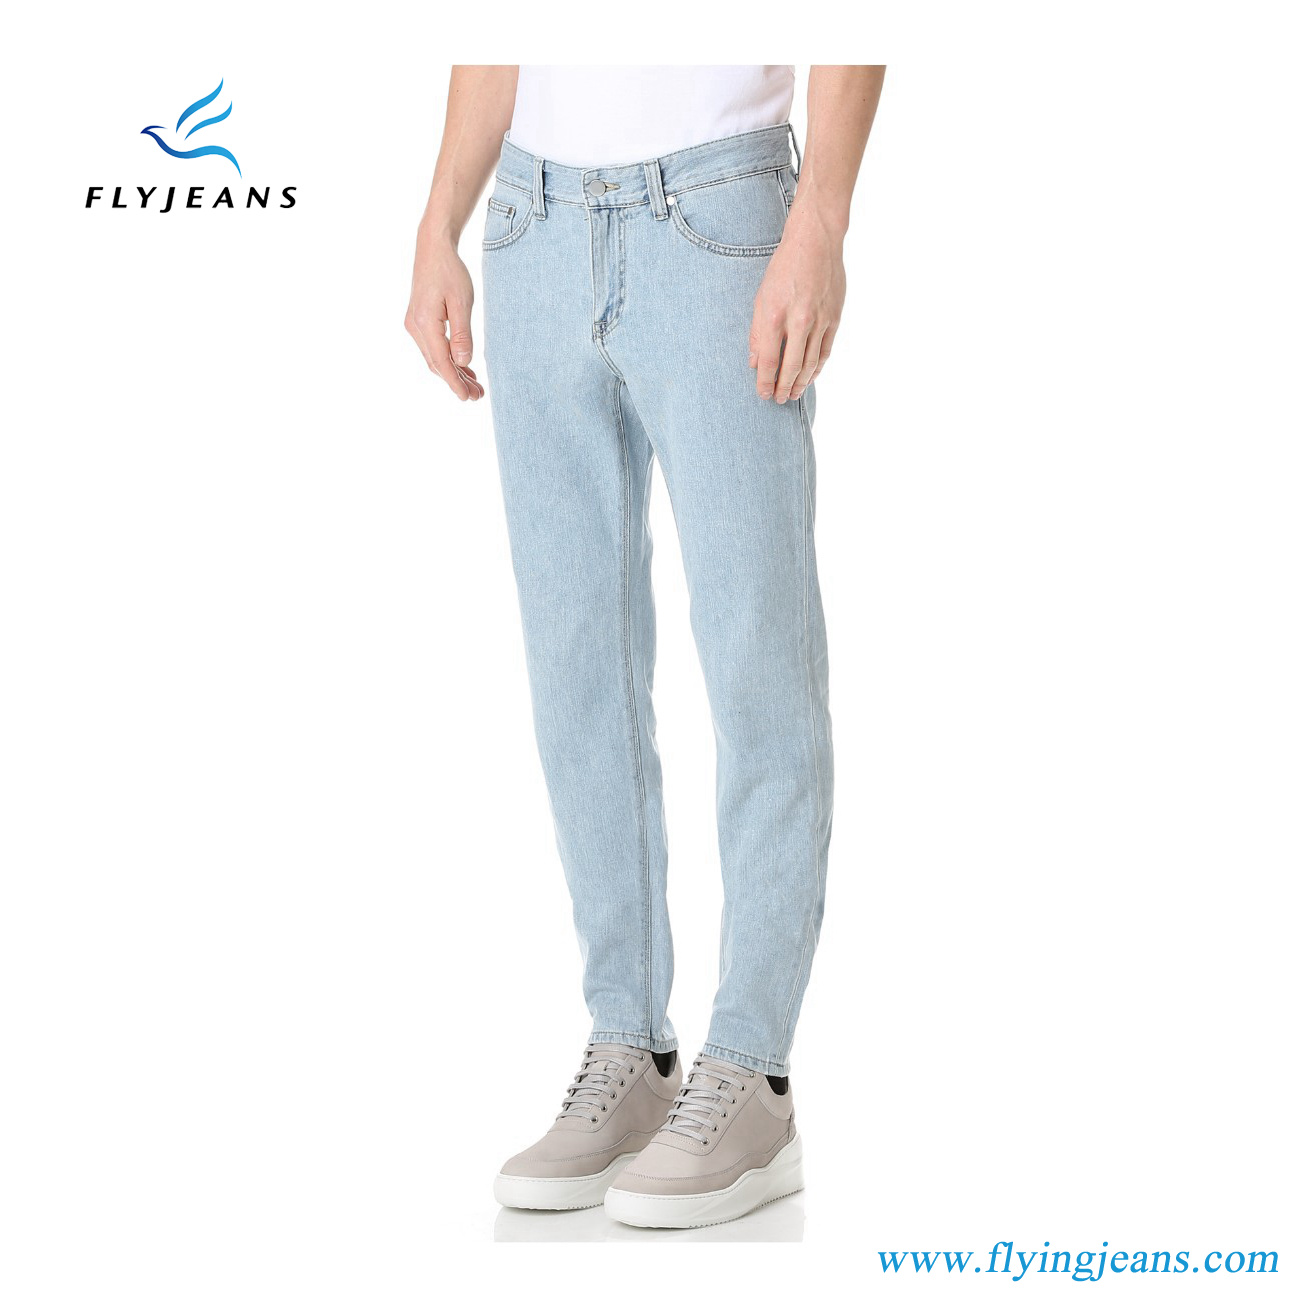 2017 Fashion Slim Denim Jeans with Light Wash for Men by Fly Jeans